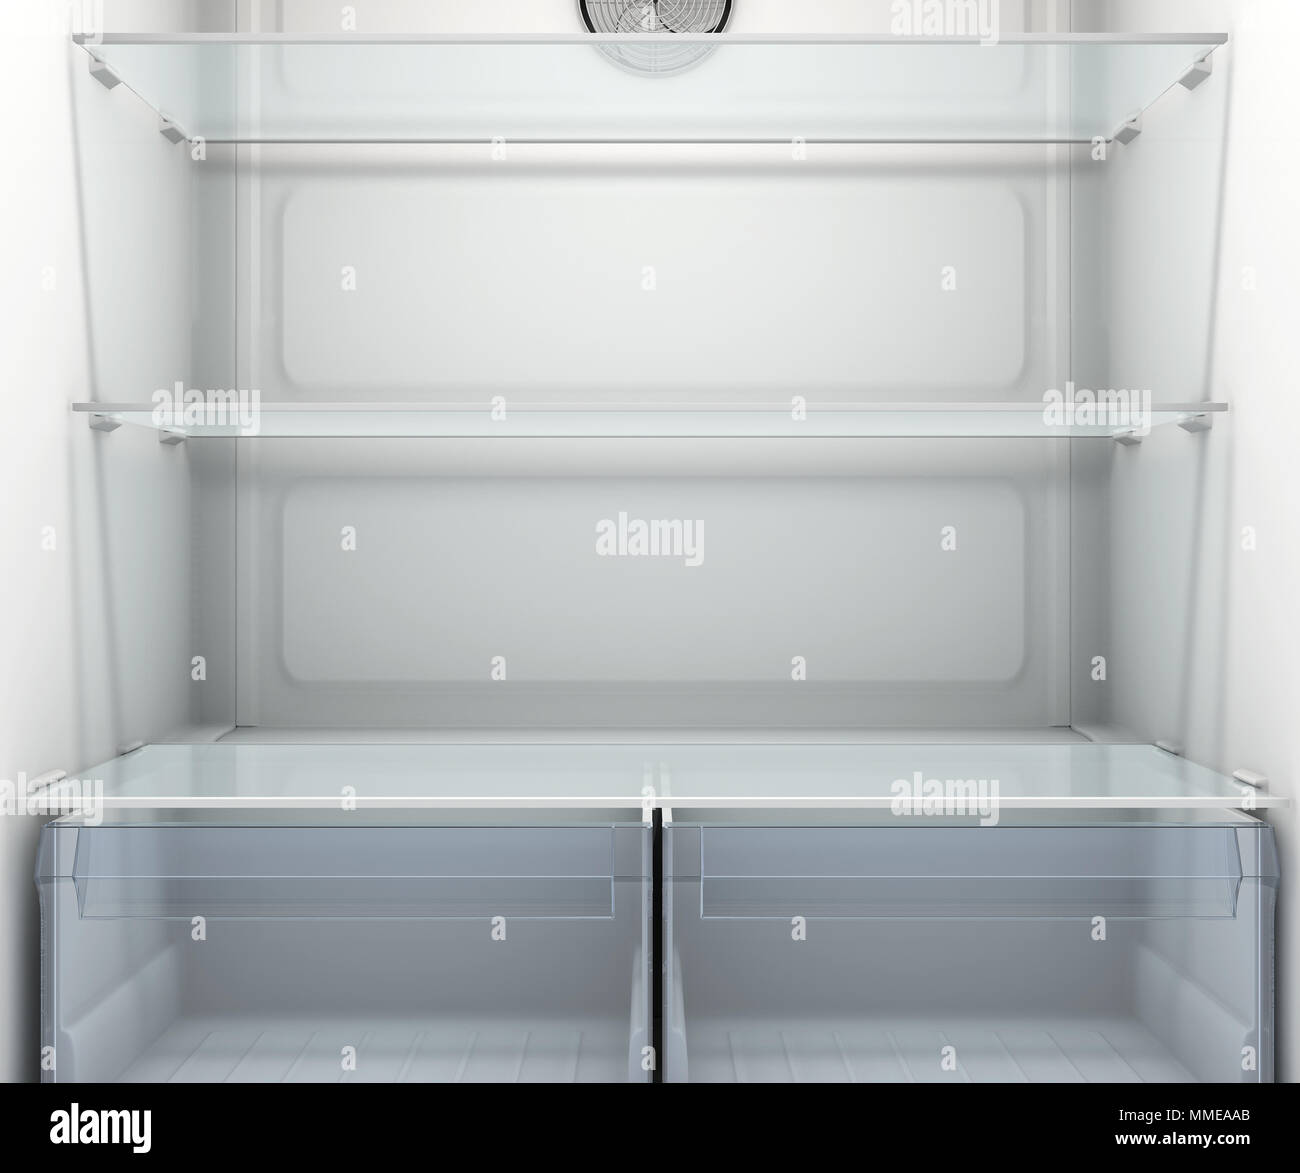 A view inside an empty household fridge or freezer with glass shelves and drawers - 3D render Stock Photo